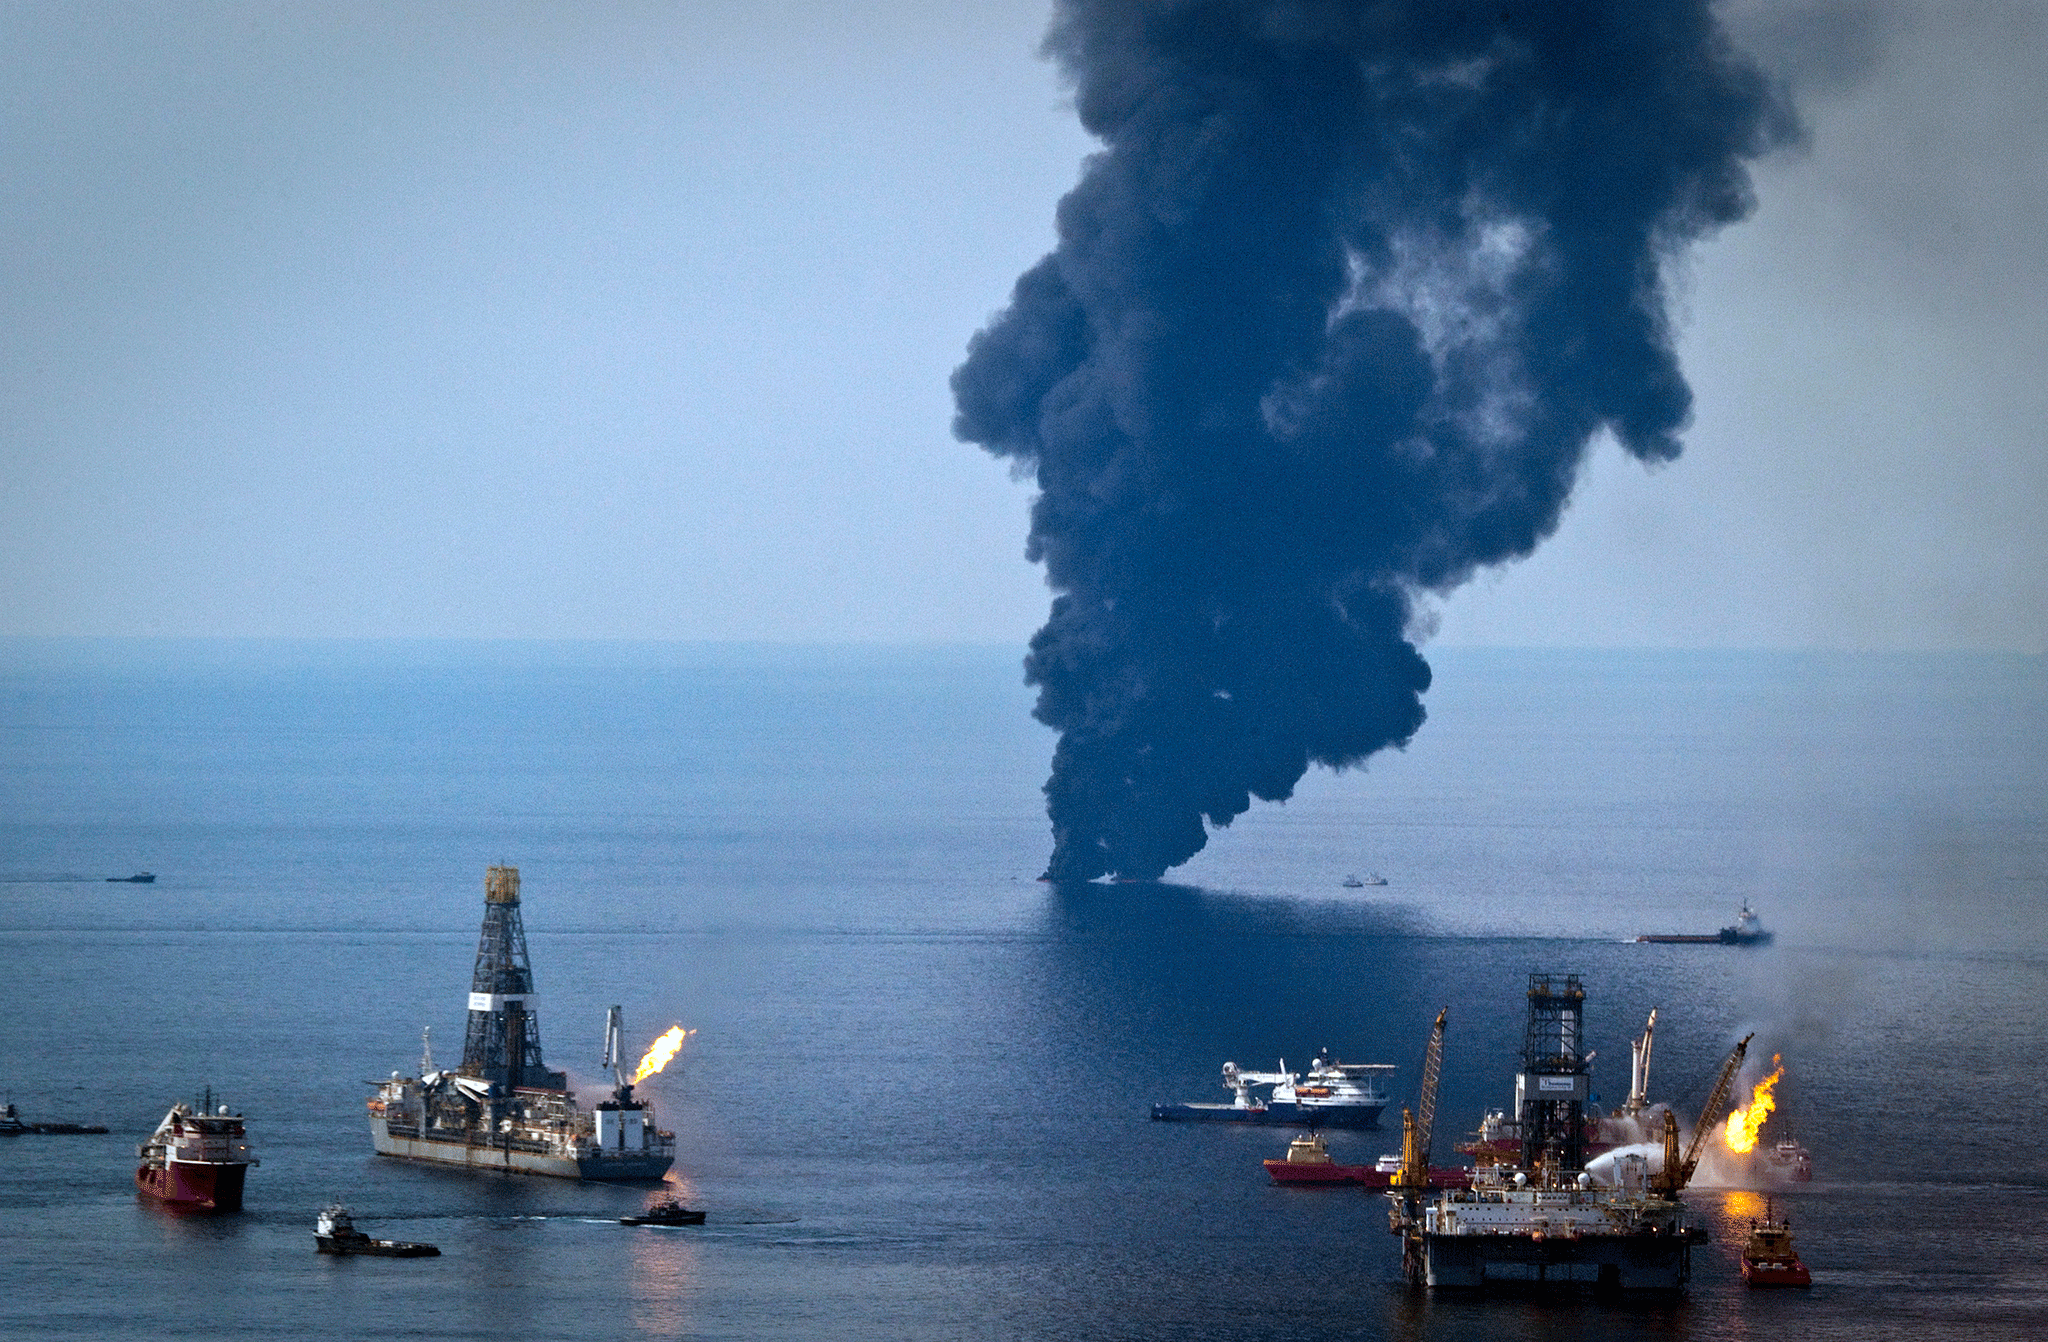 BP's Deepwater Horizon oil rig in flames in the Gulf of Mexico in June 2010 – the company may be embroiled in a new oil scandal